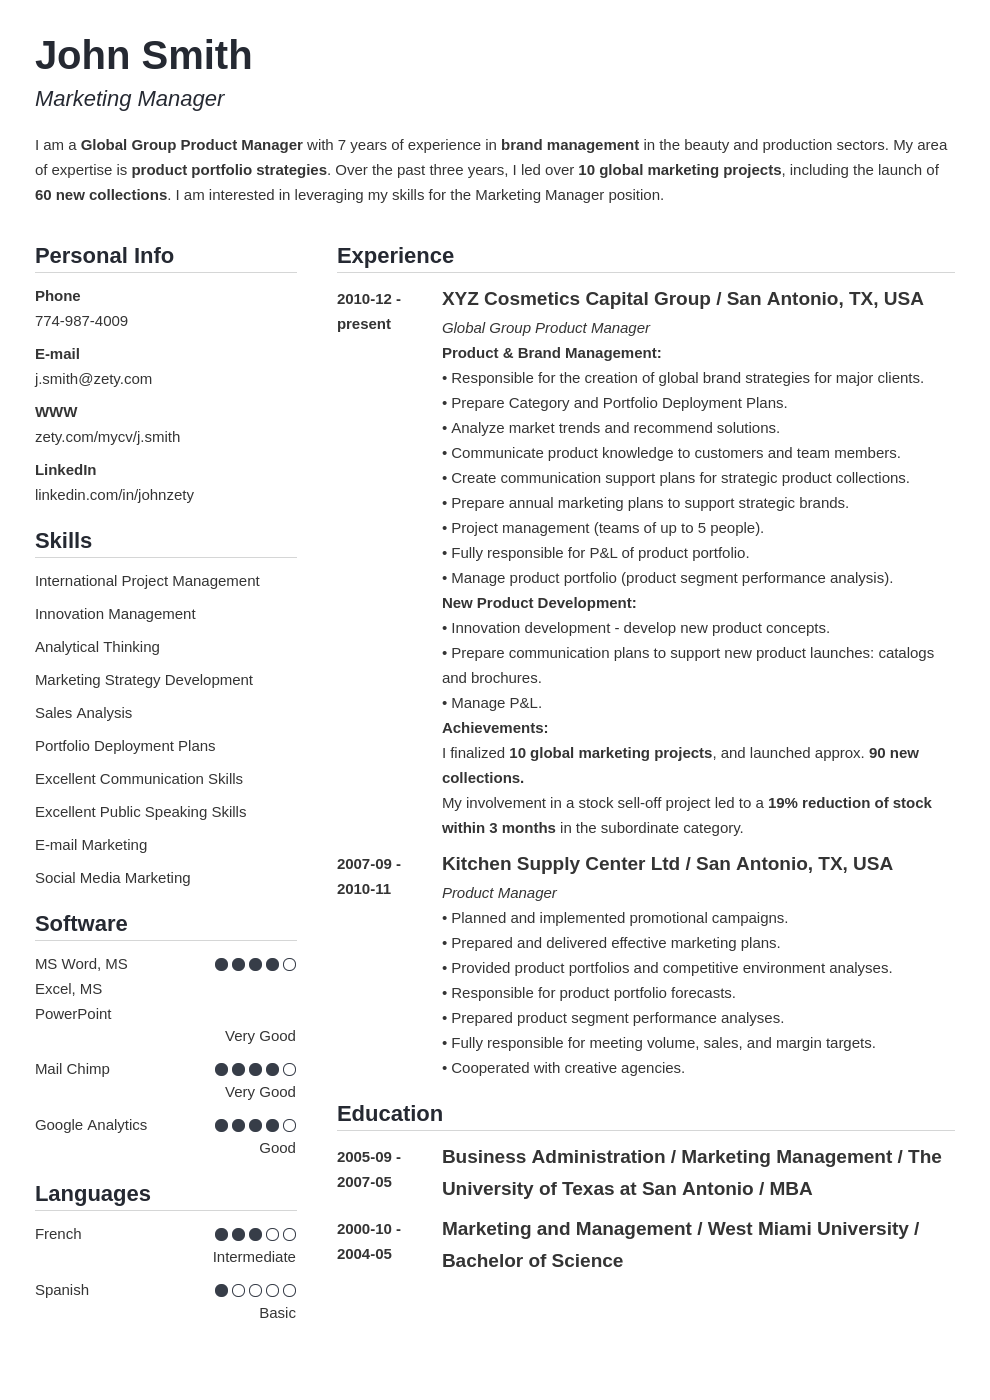 helps students complete a resume